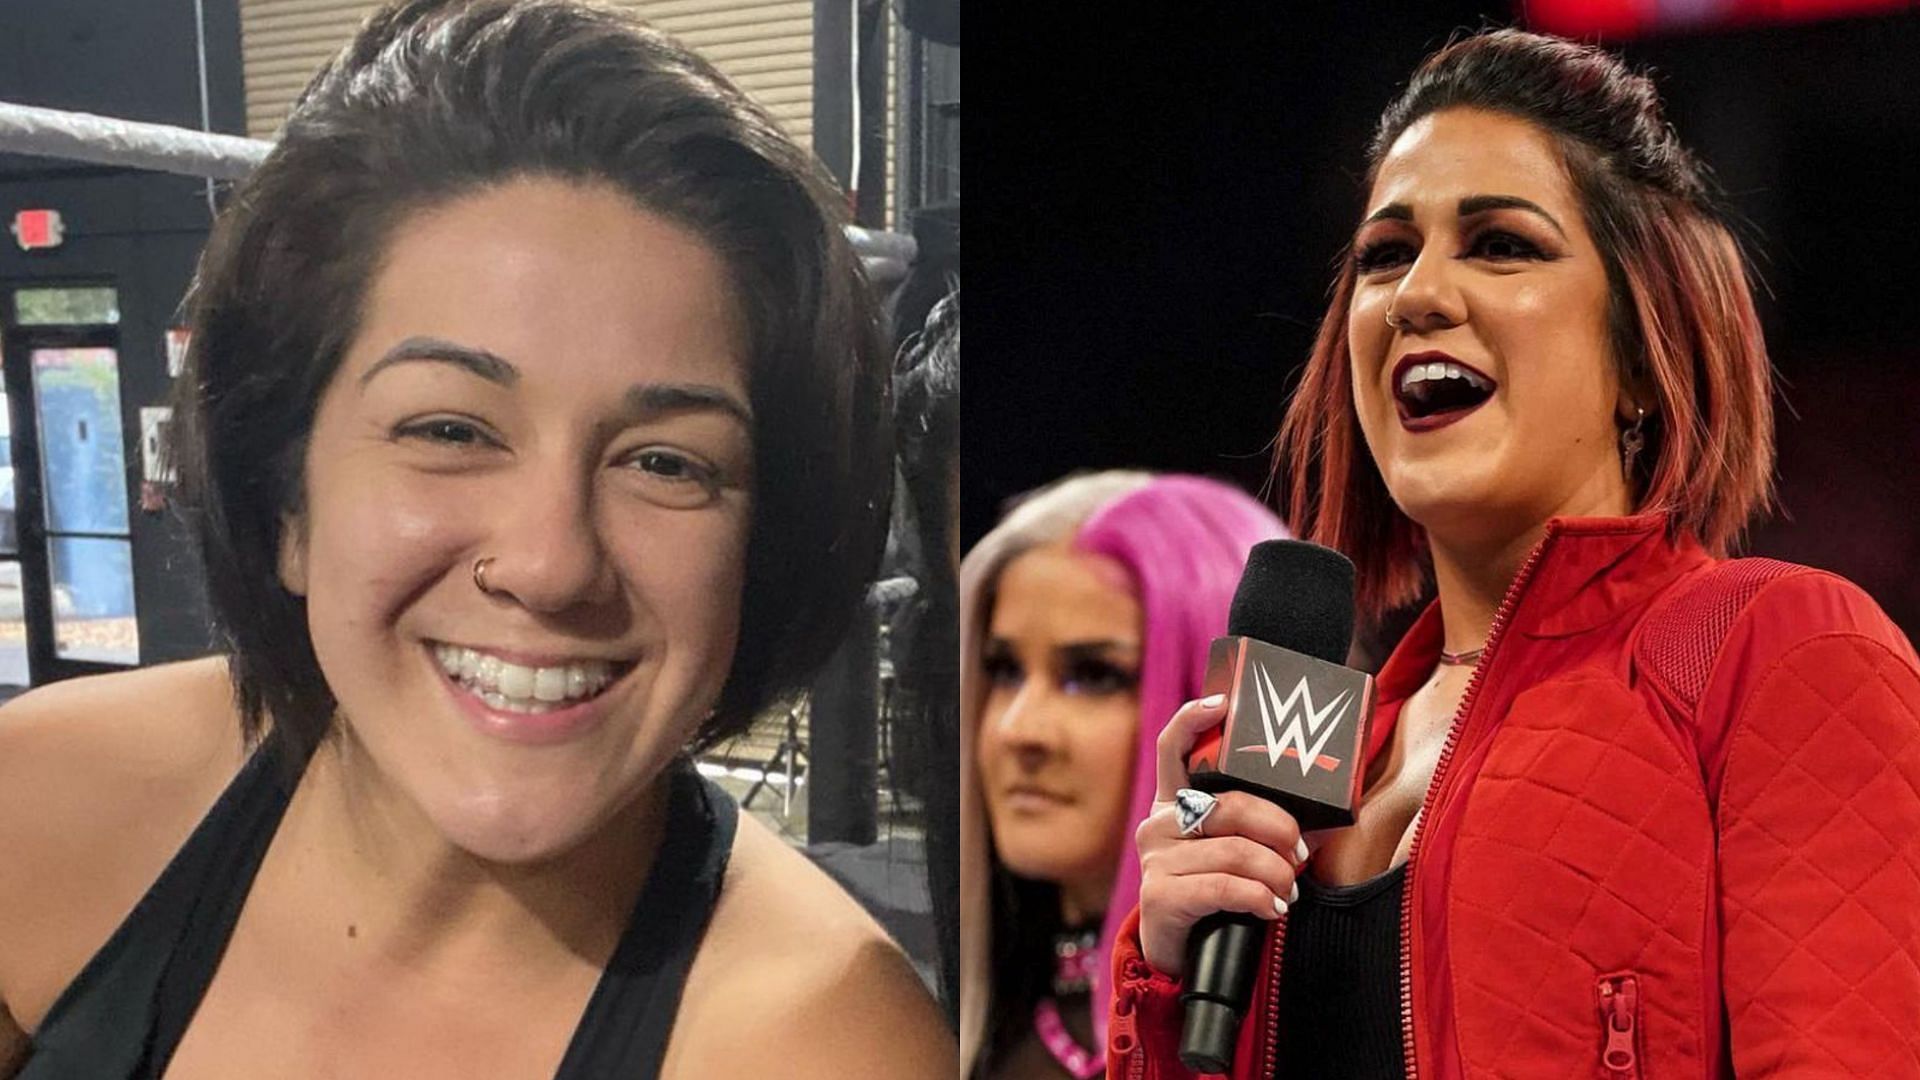 Bayley without makeup (left) and with makeup (right)